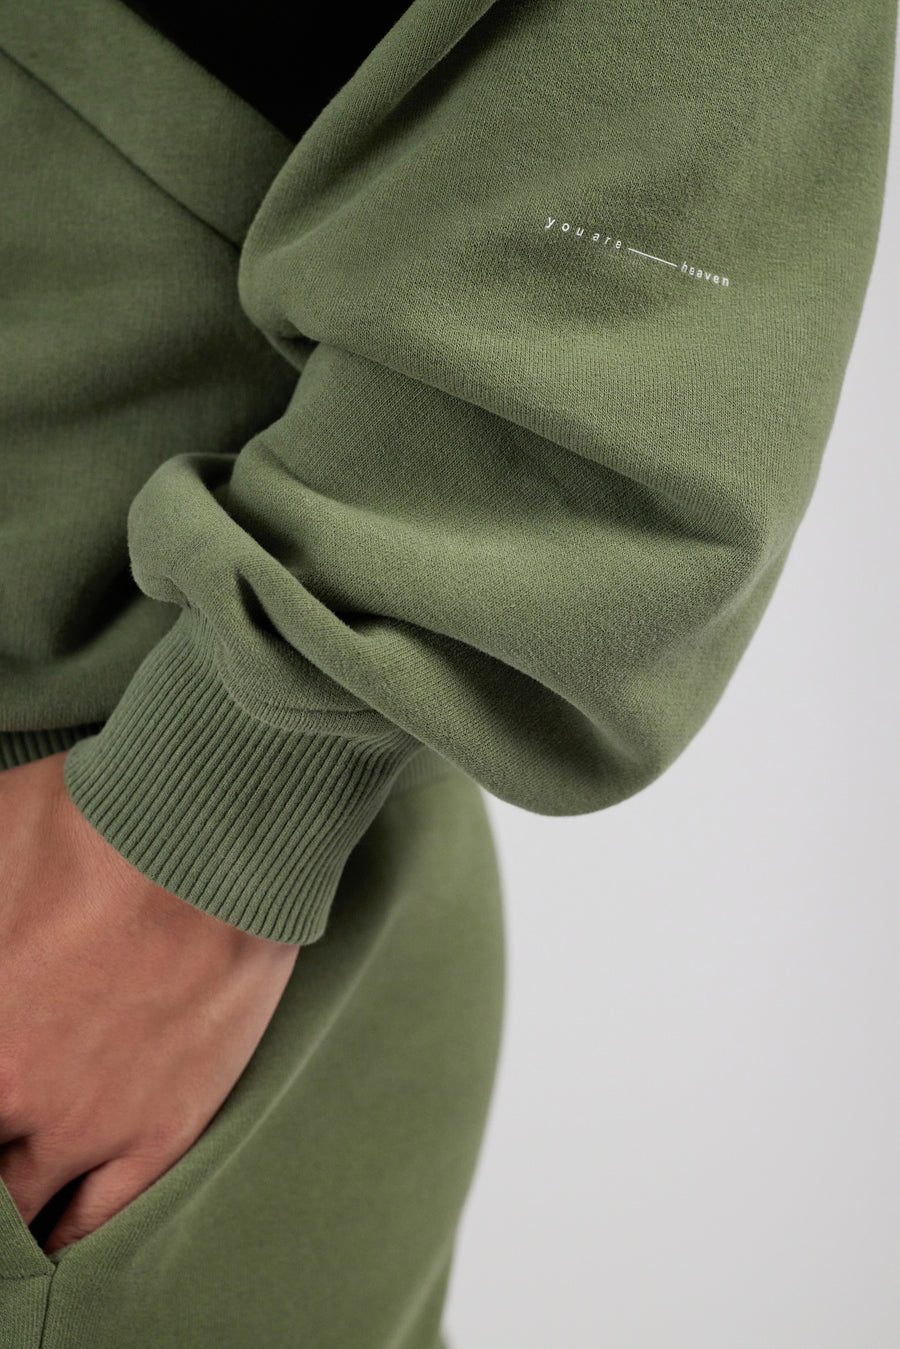 Printed Wording Detail on an oversized jacket  in color sage green